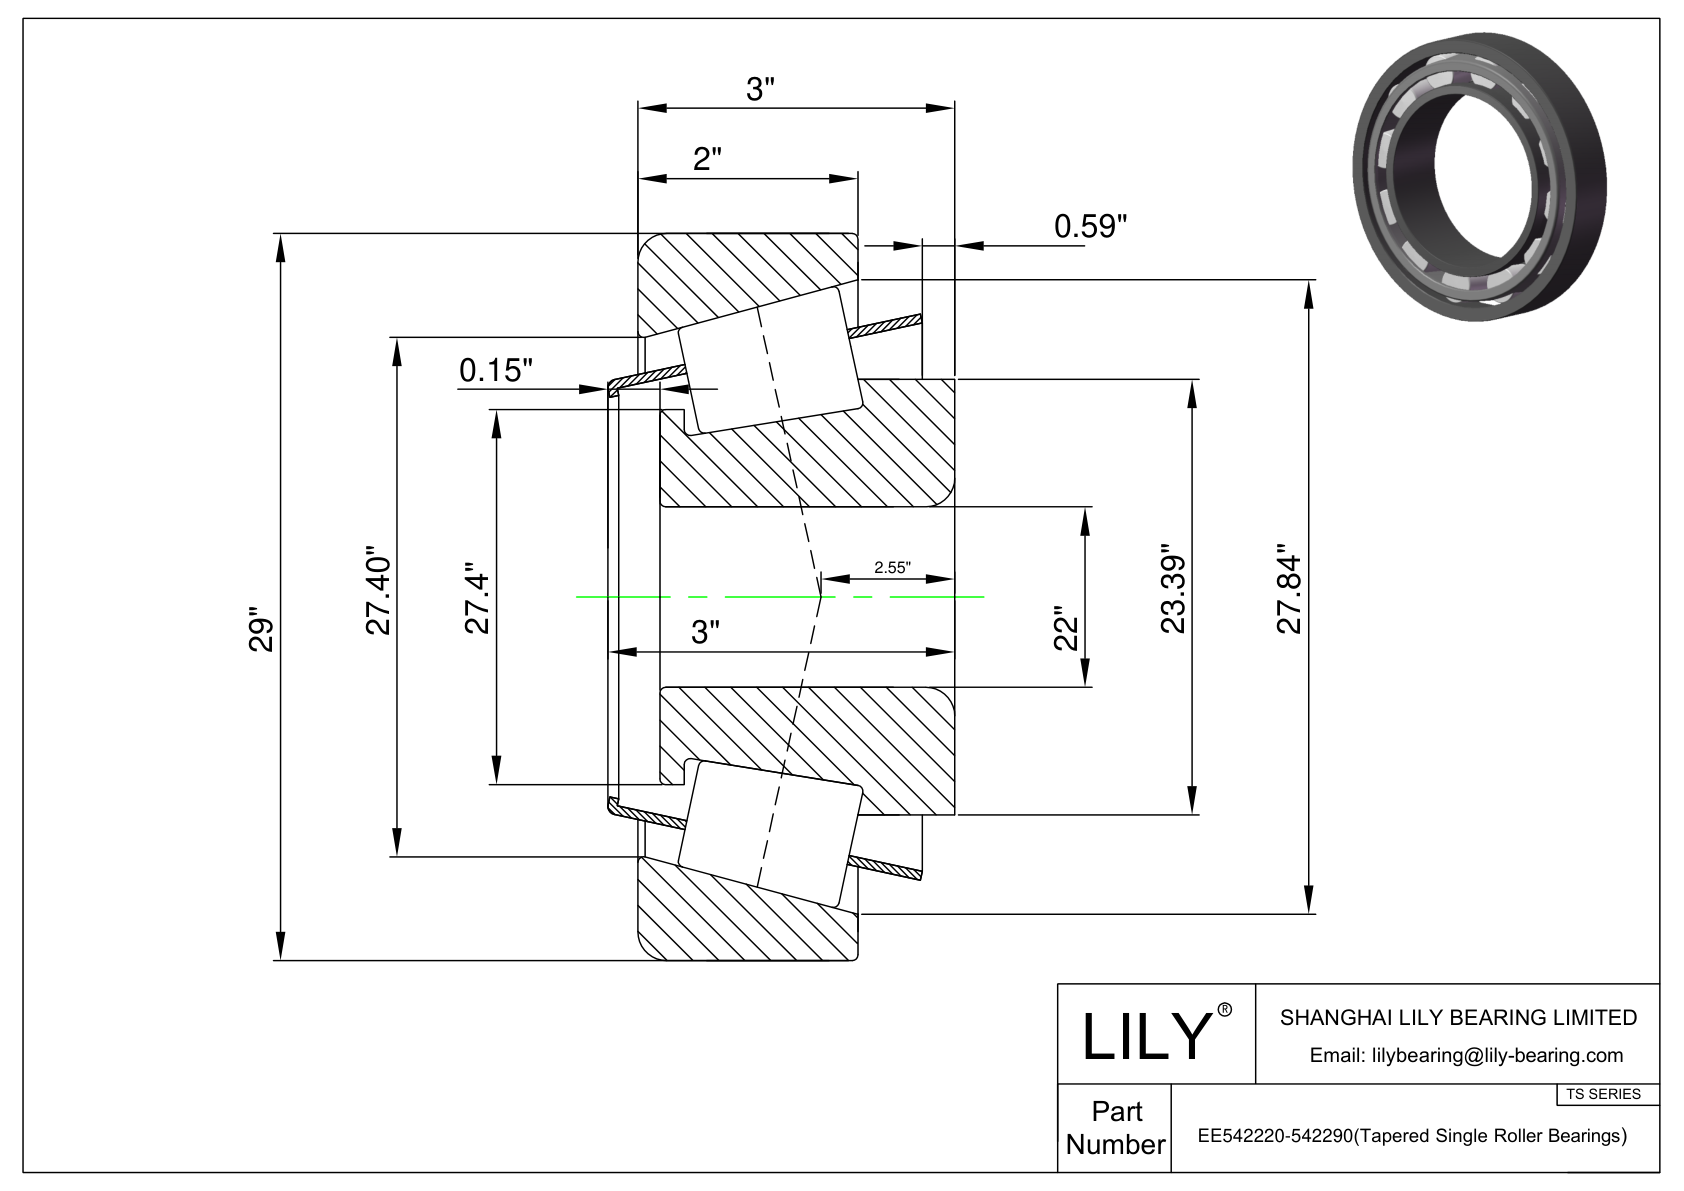 EE542220-542290 TS (Tapered Single Roller Bearings) (Imperial) cad drawing